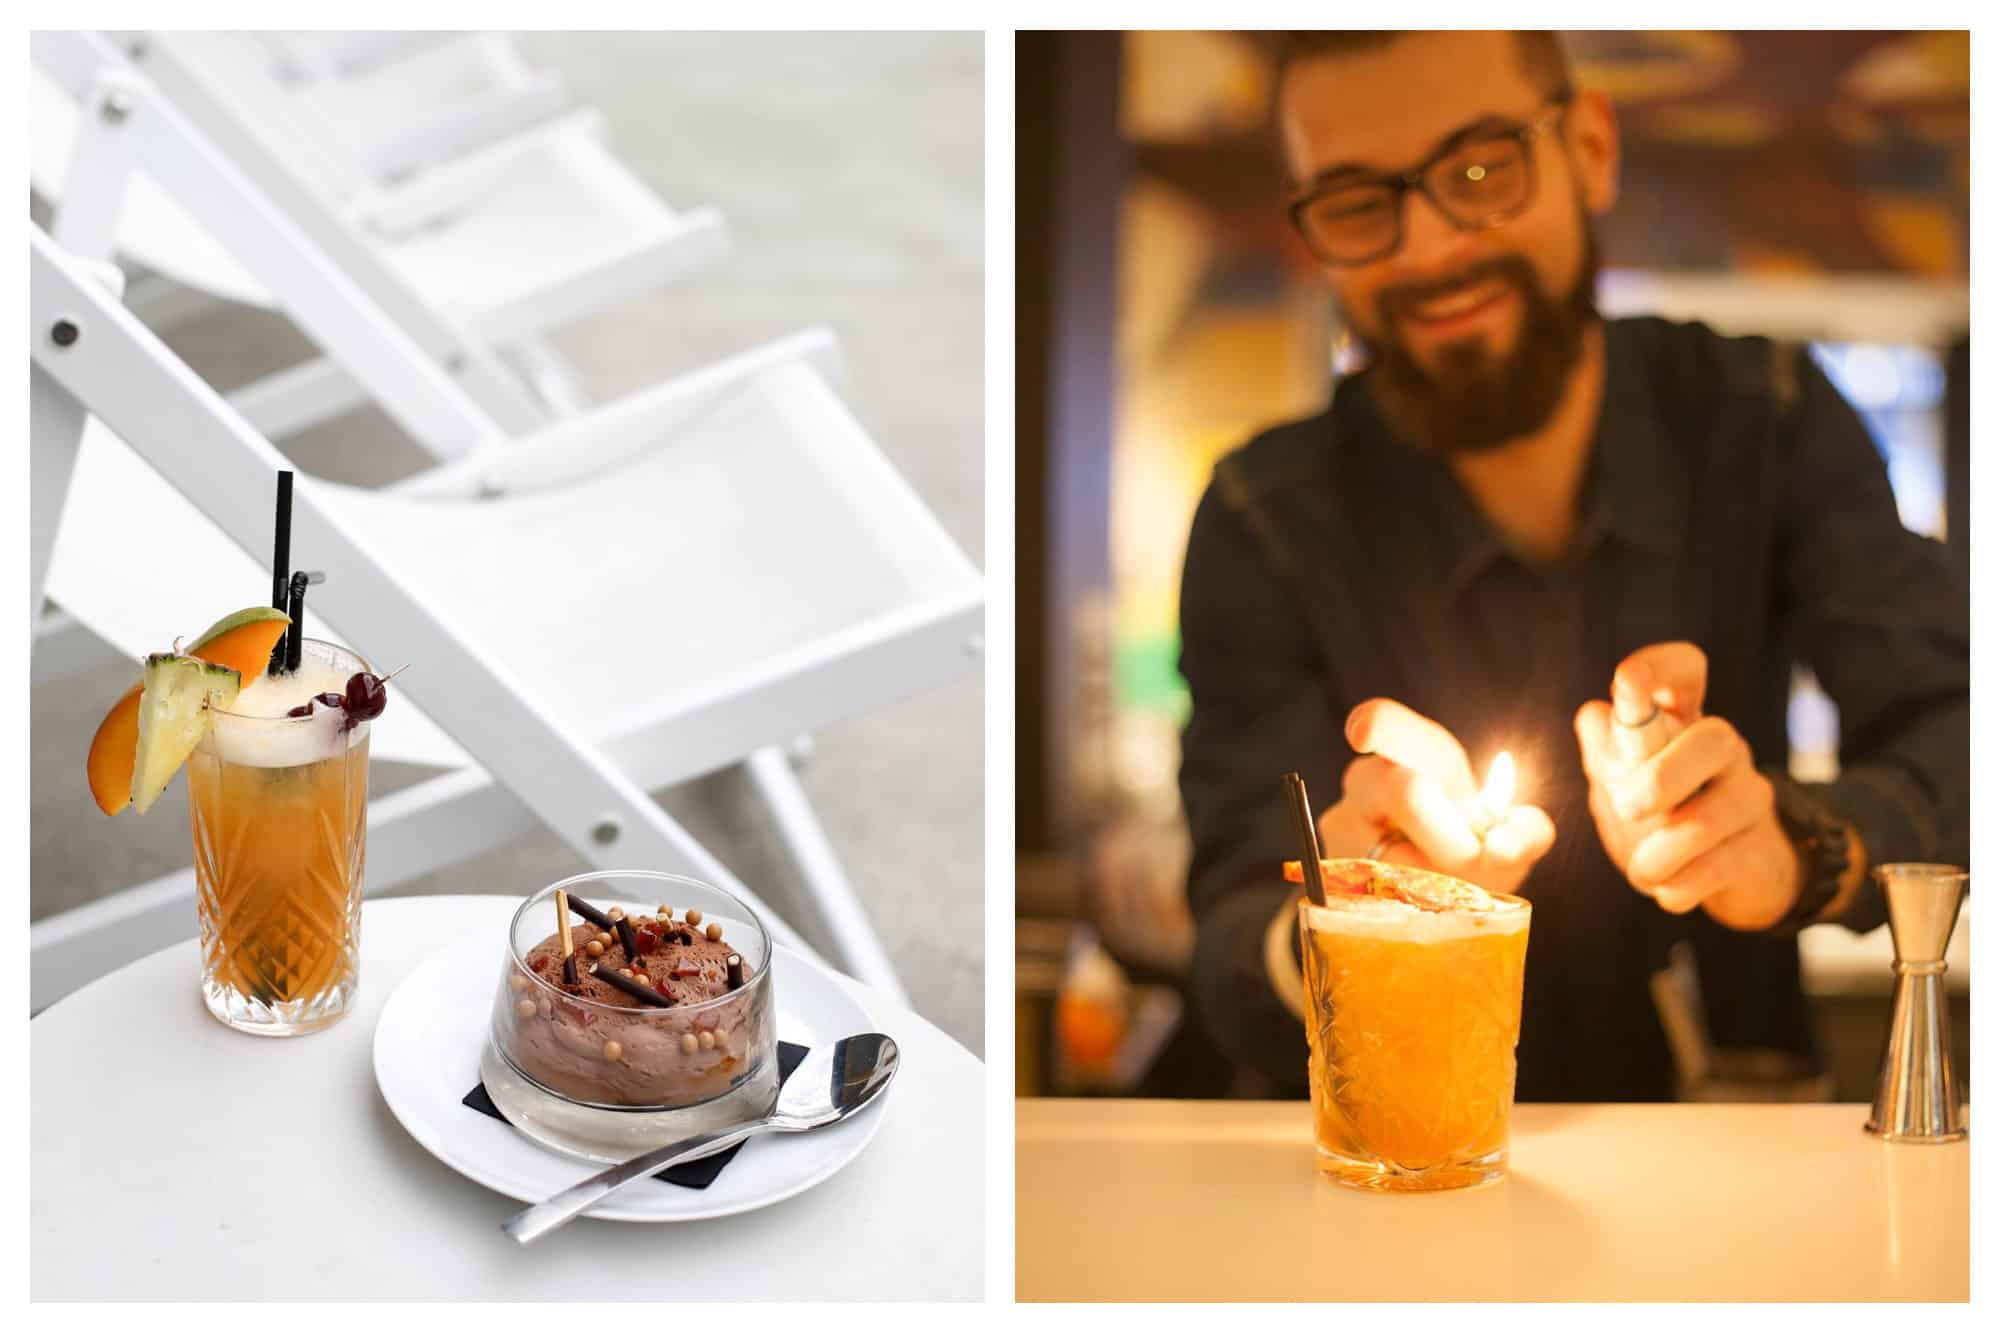 A cocktail and chocolate mousse dessert served by white deckchairs on the Molitor Hotel terrace in Paris (left) and the barman making a cocktail by lighting the top (right).